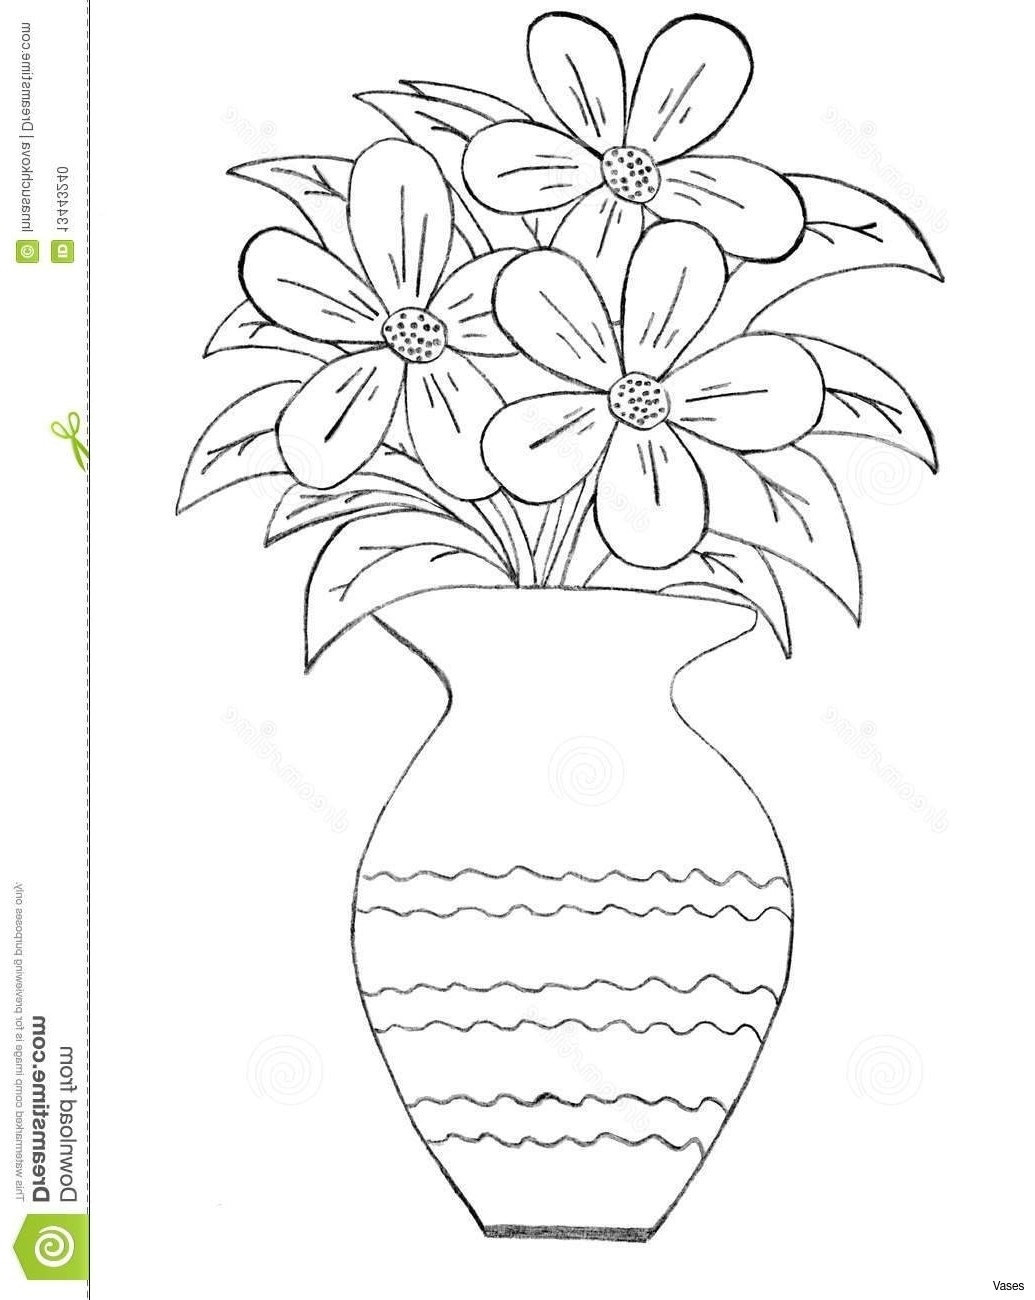 11 Great Victorian Flower Vase 2024 free download victorian flower vase of flowers clipart best of cool vases flower vase coloring page pages in flowers clipart awesome unique flower drawing design design art flower s s media cache ak0